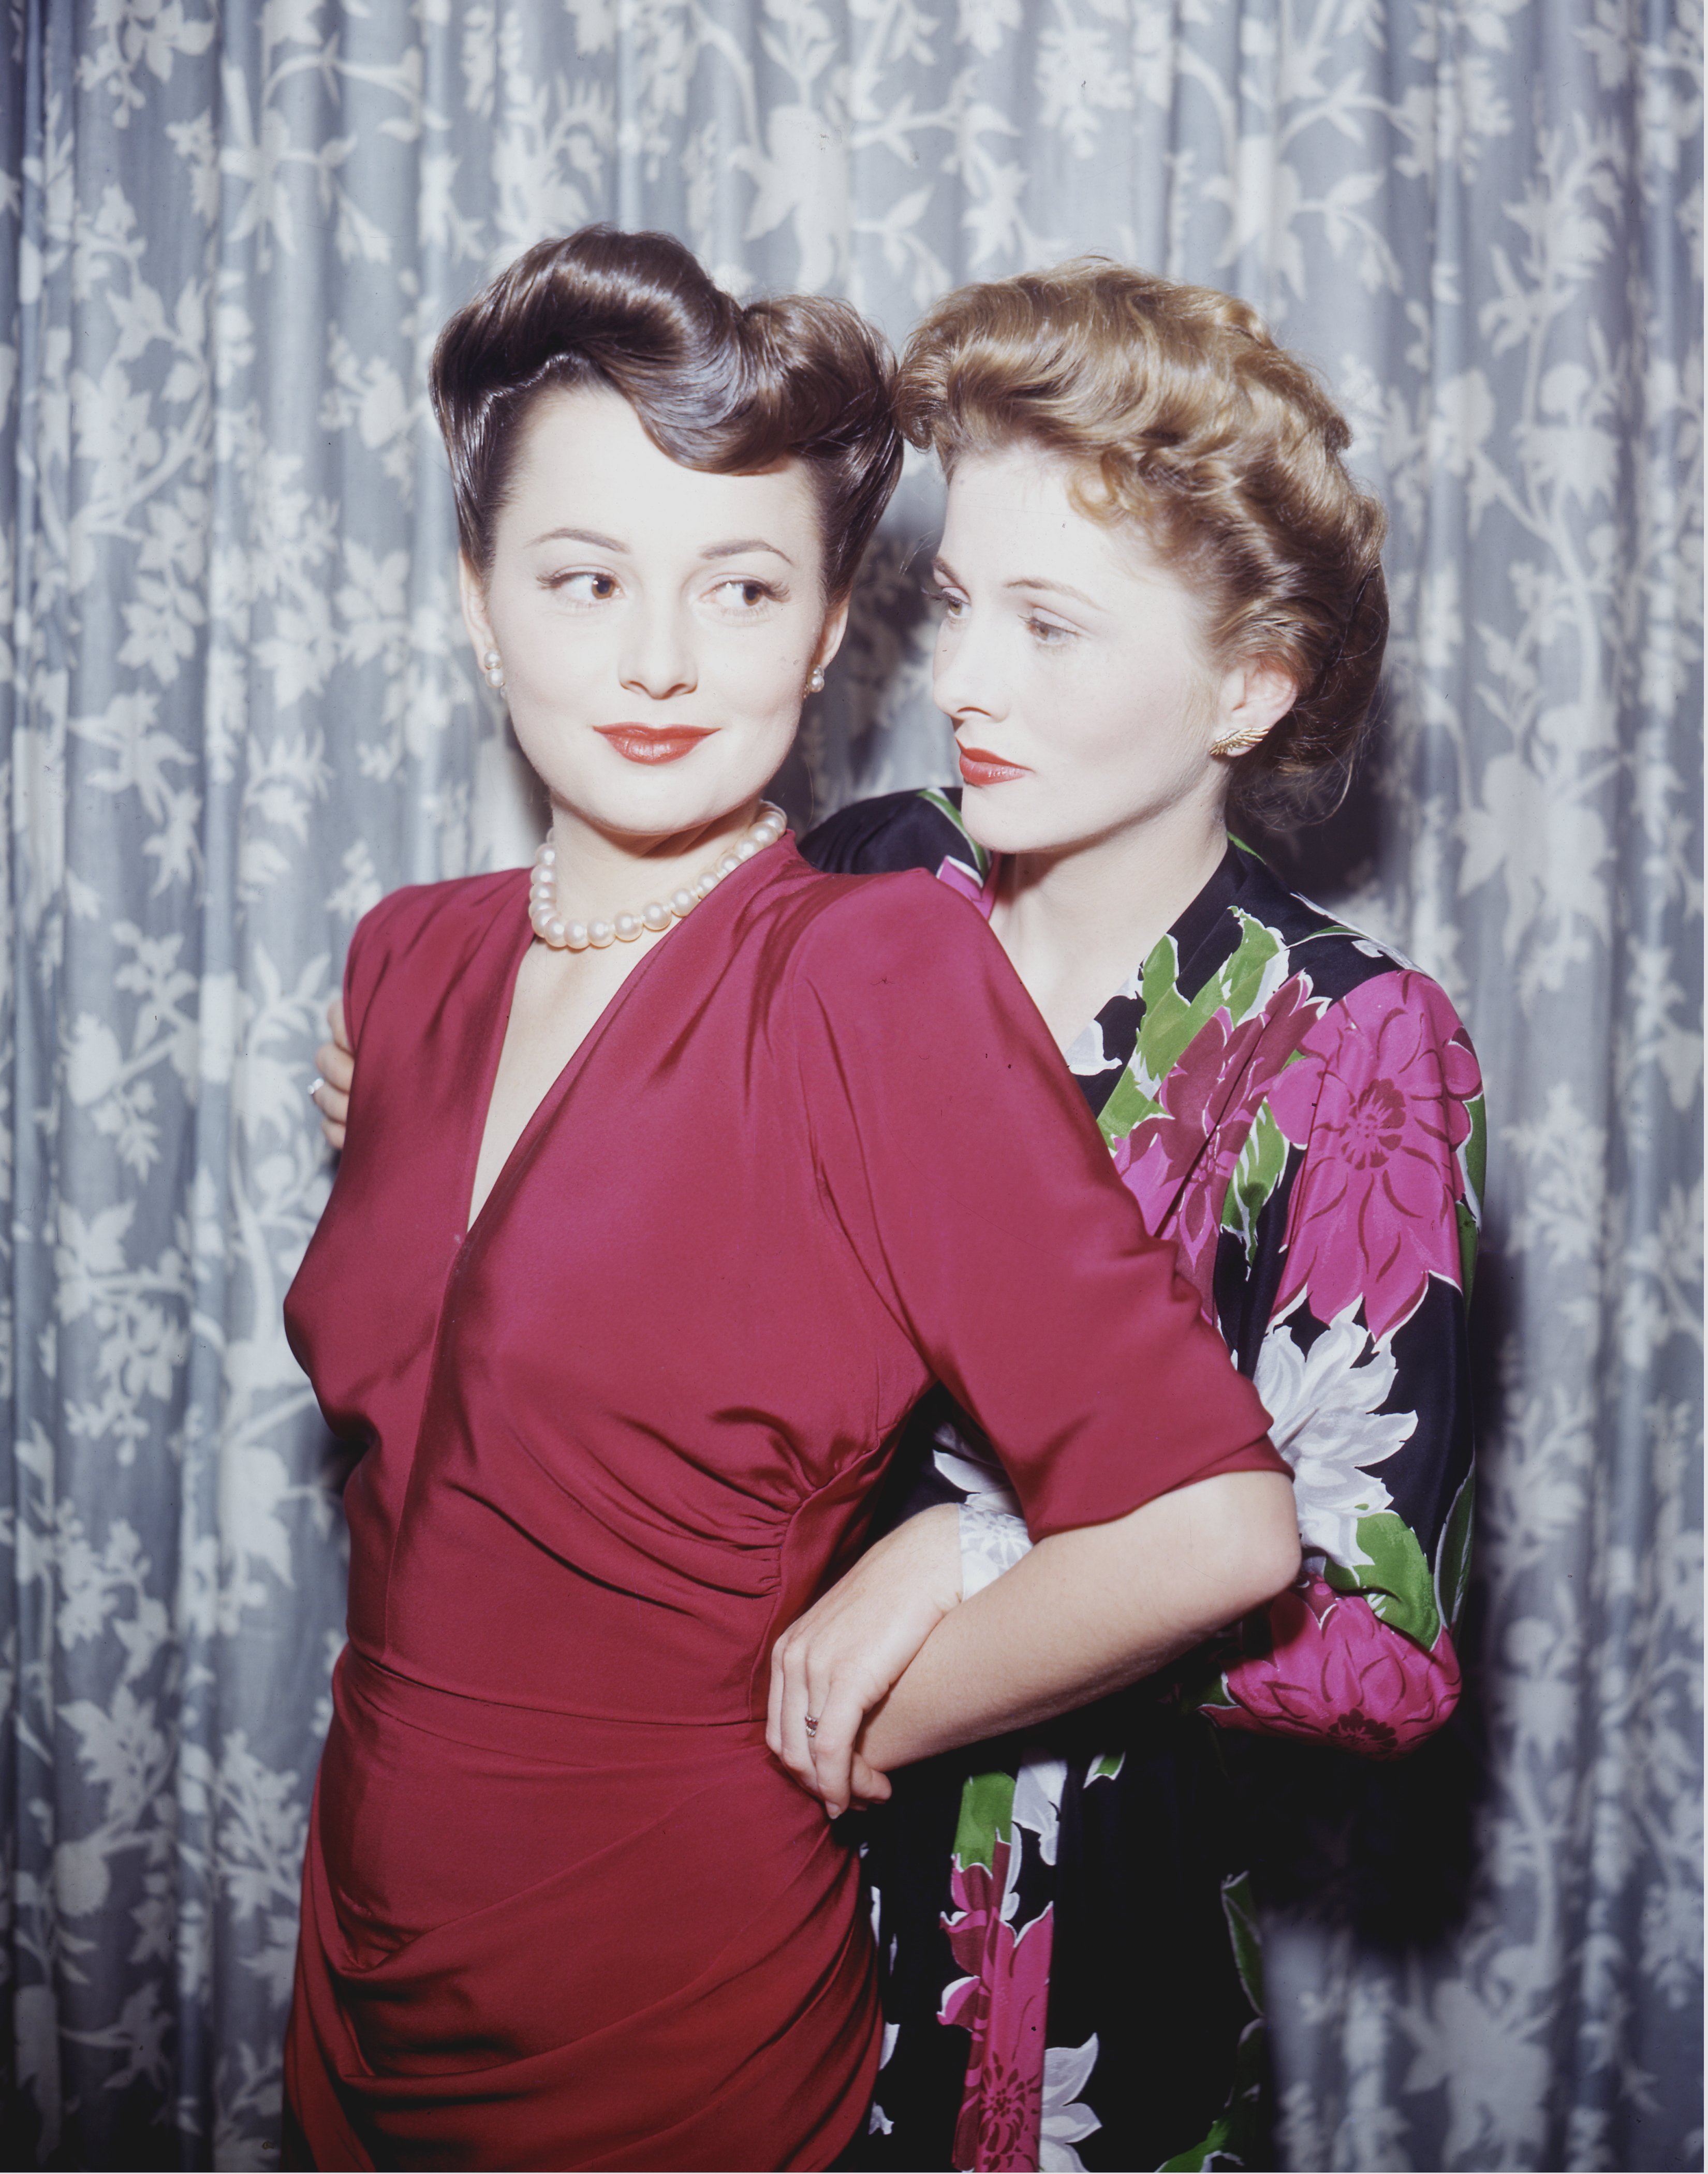 Actress Olivia de Havilland (left) with her sister, actress Joan Fontaine, circa 1945. | Source: Getty Images